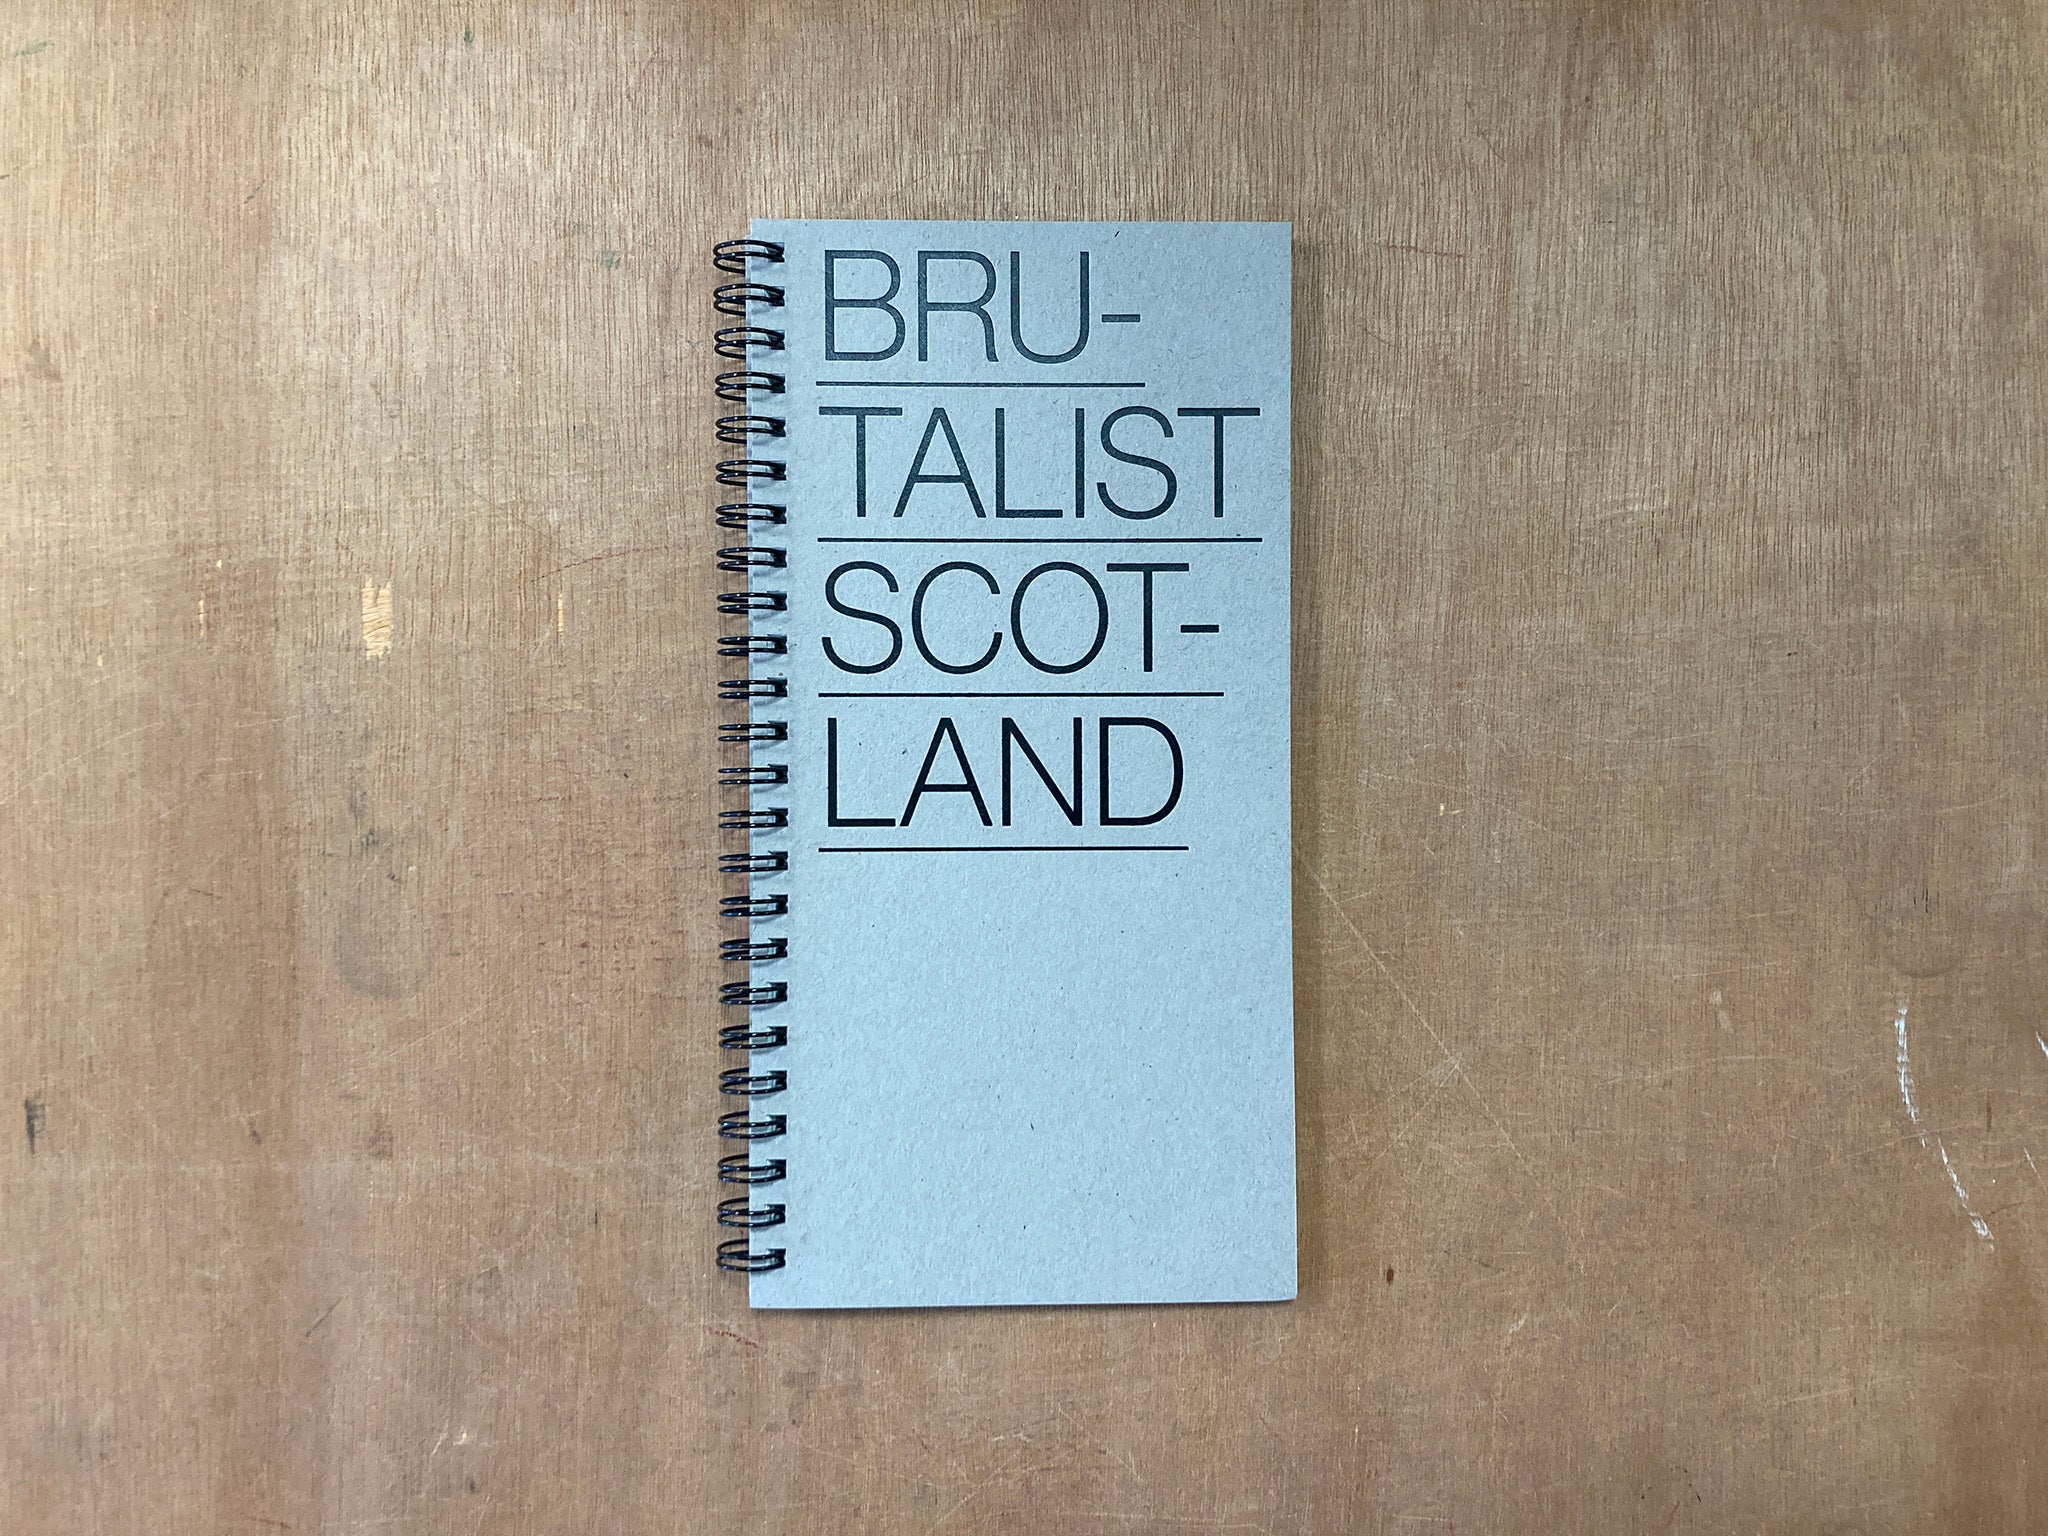 BRUTALIST SCOTLAND by Kyle Lamond and Peter Atkinson